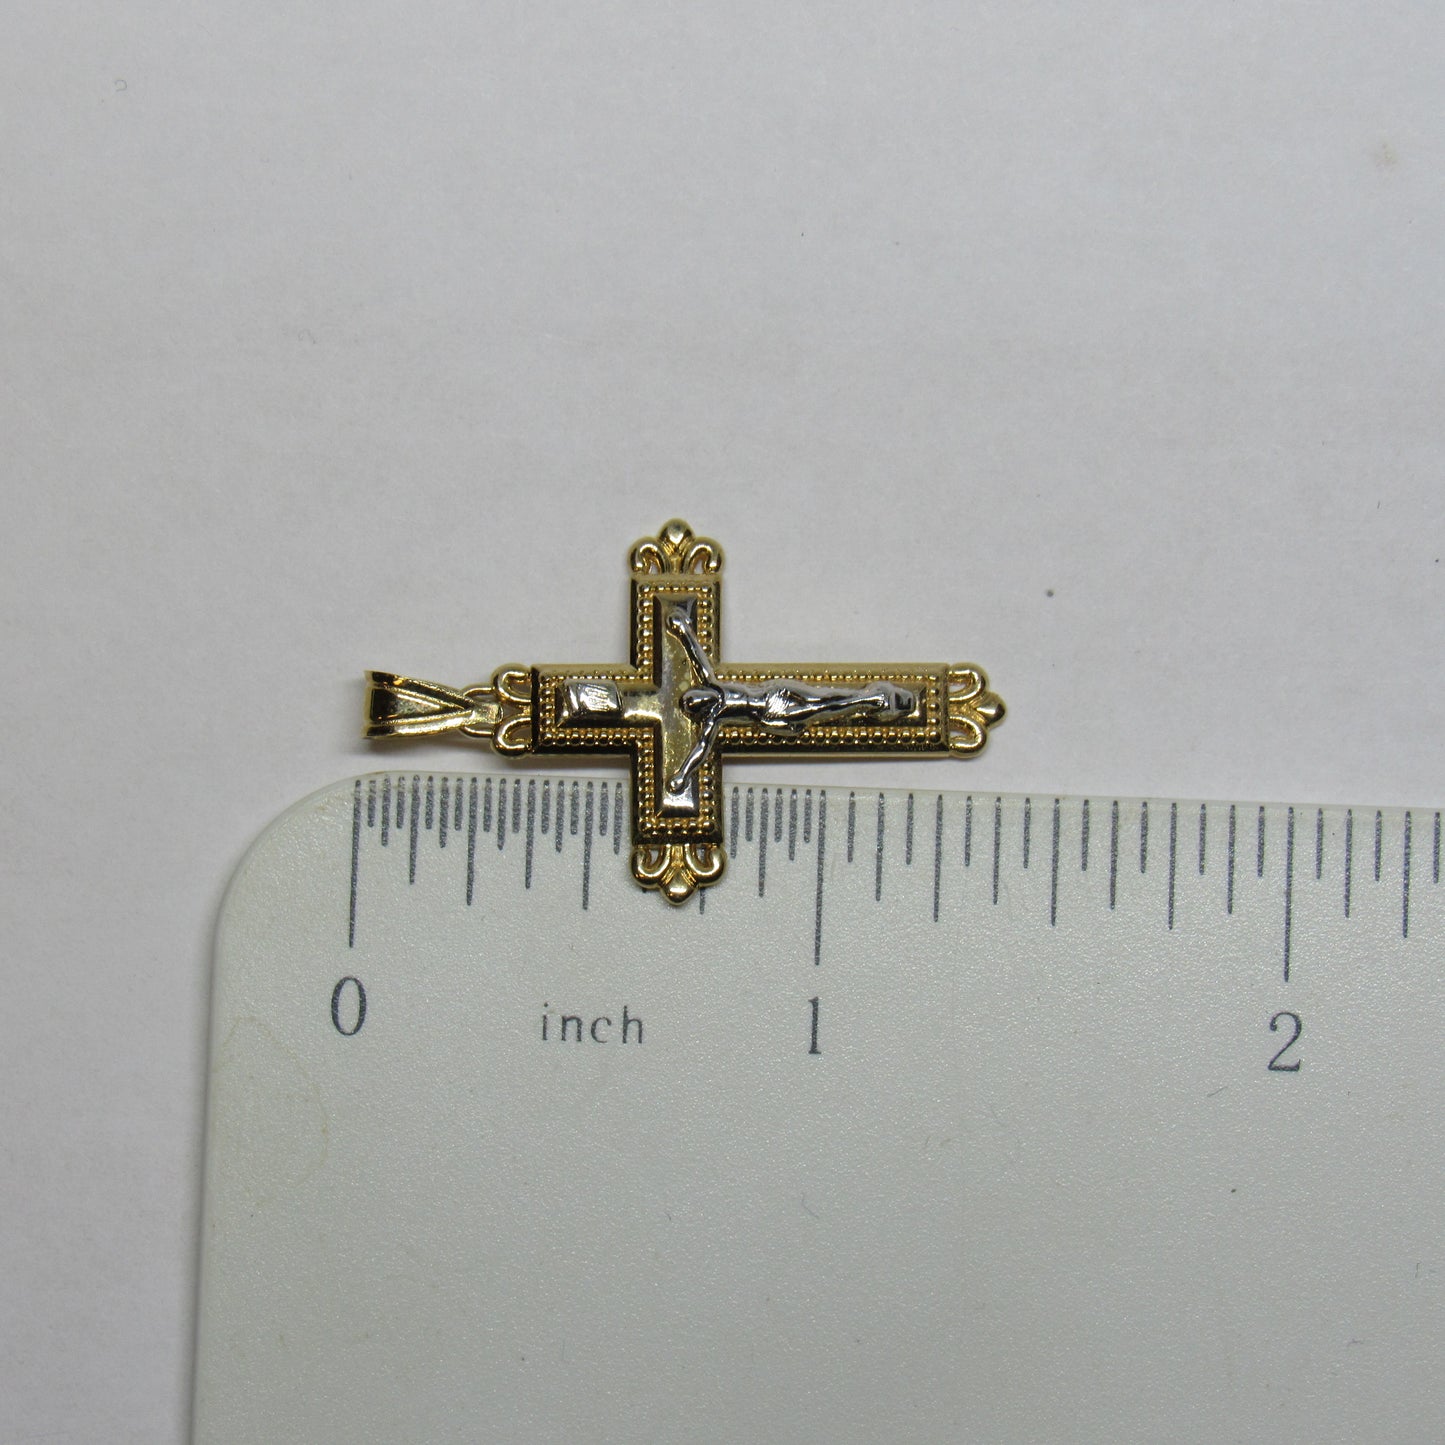 14k Two Tone White & Yellow Gold Cross Pendant - Michael Anthony - 1 3/8 in